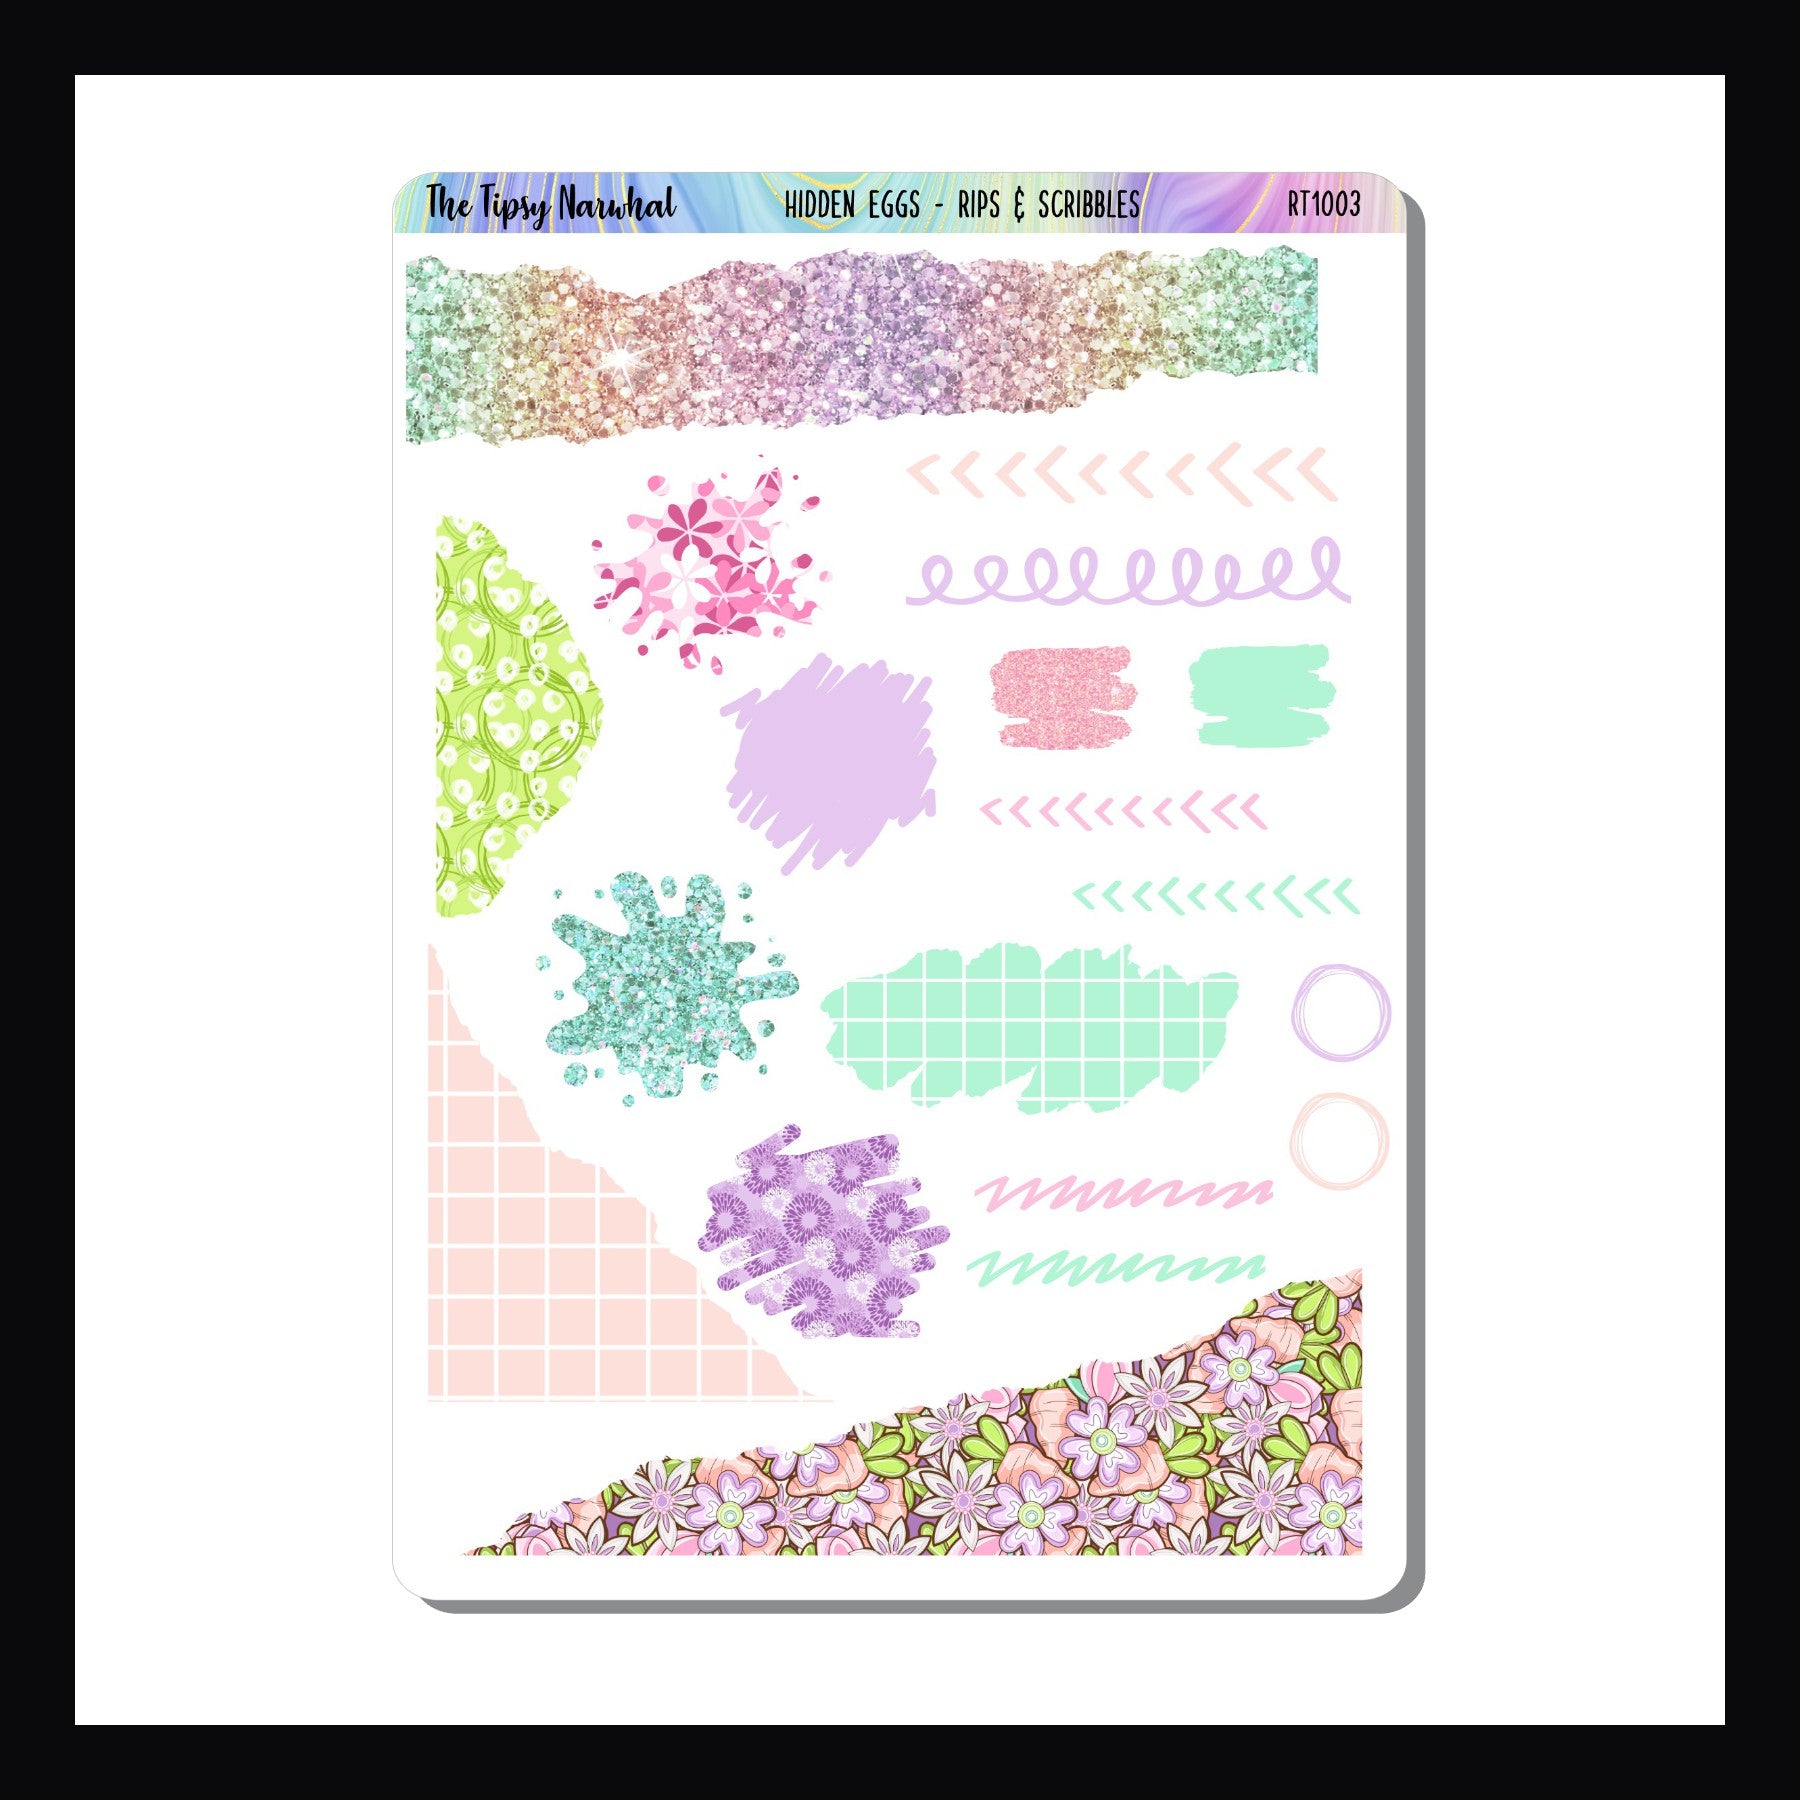 Hidden Eggs Journal Kit - Rips & Scribbles add-on sheet.  The Rips & Scribbles sheet focuses on abstract scribble stickers and stickers featuring a torn paper look.  All designs and colors coordinate with the Hidden Eggs kits. 